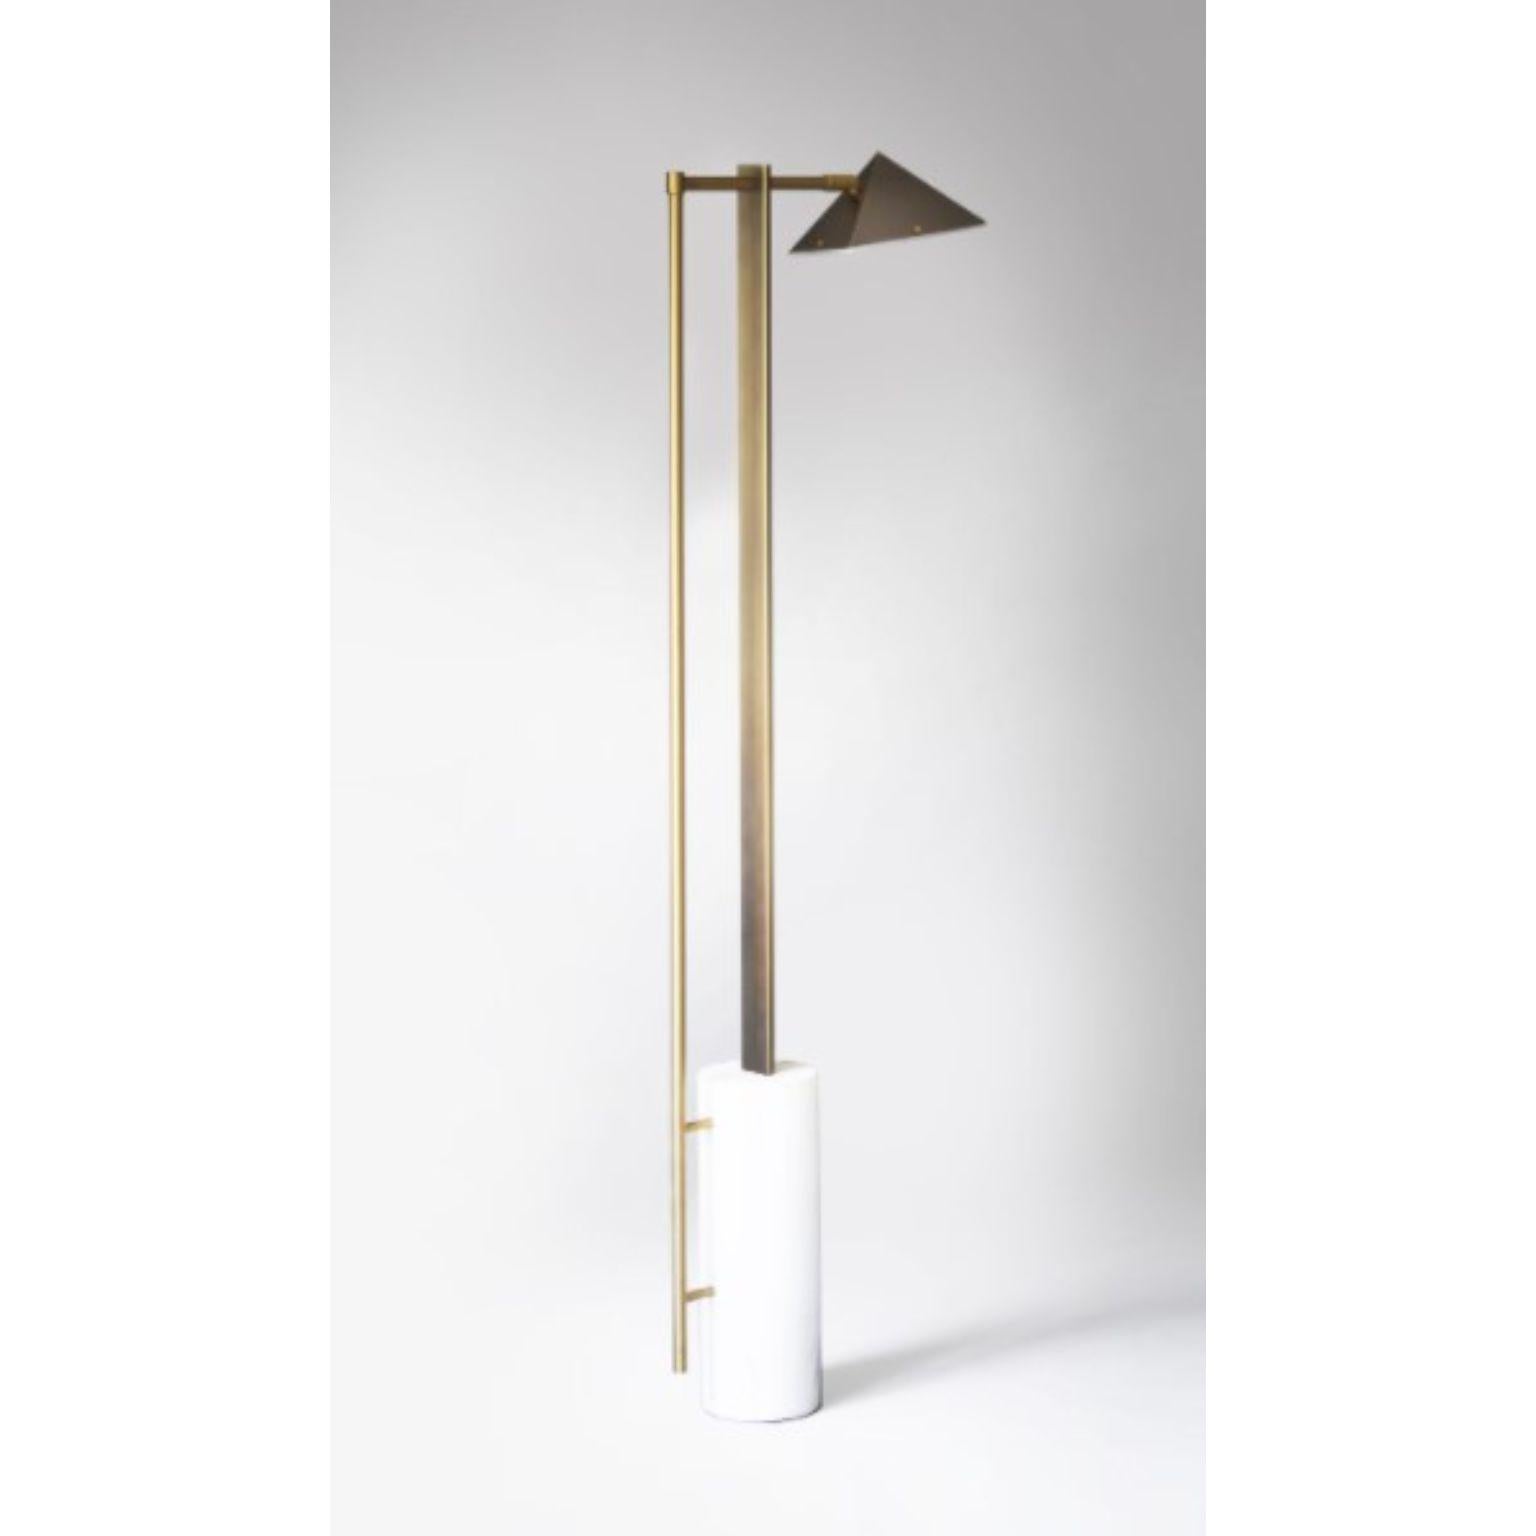 Marble and wedge floor lamp by Square in Circle
Dimensions: D 40 x W 43.5 x H 147.2 cm
Materials: Brushed brass/ brushed grey metal/ white marble/ white frosted perspex
Other finishes available.

Our floor lamp is inspired by Bauhaus geometry